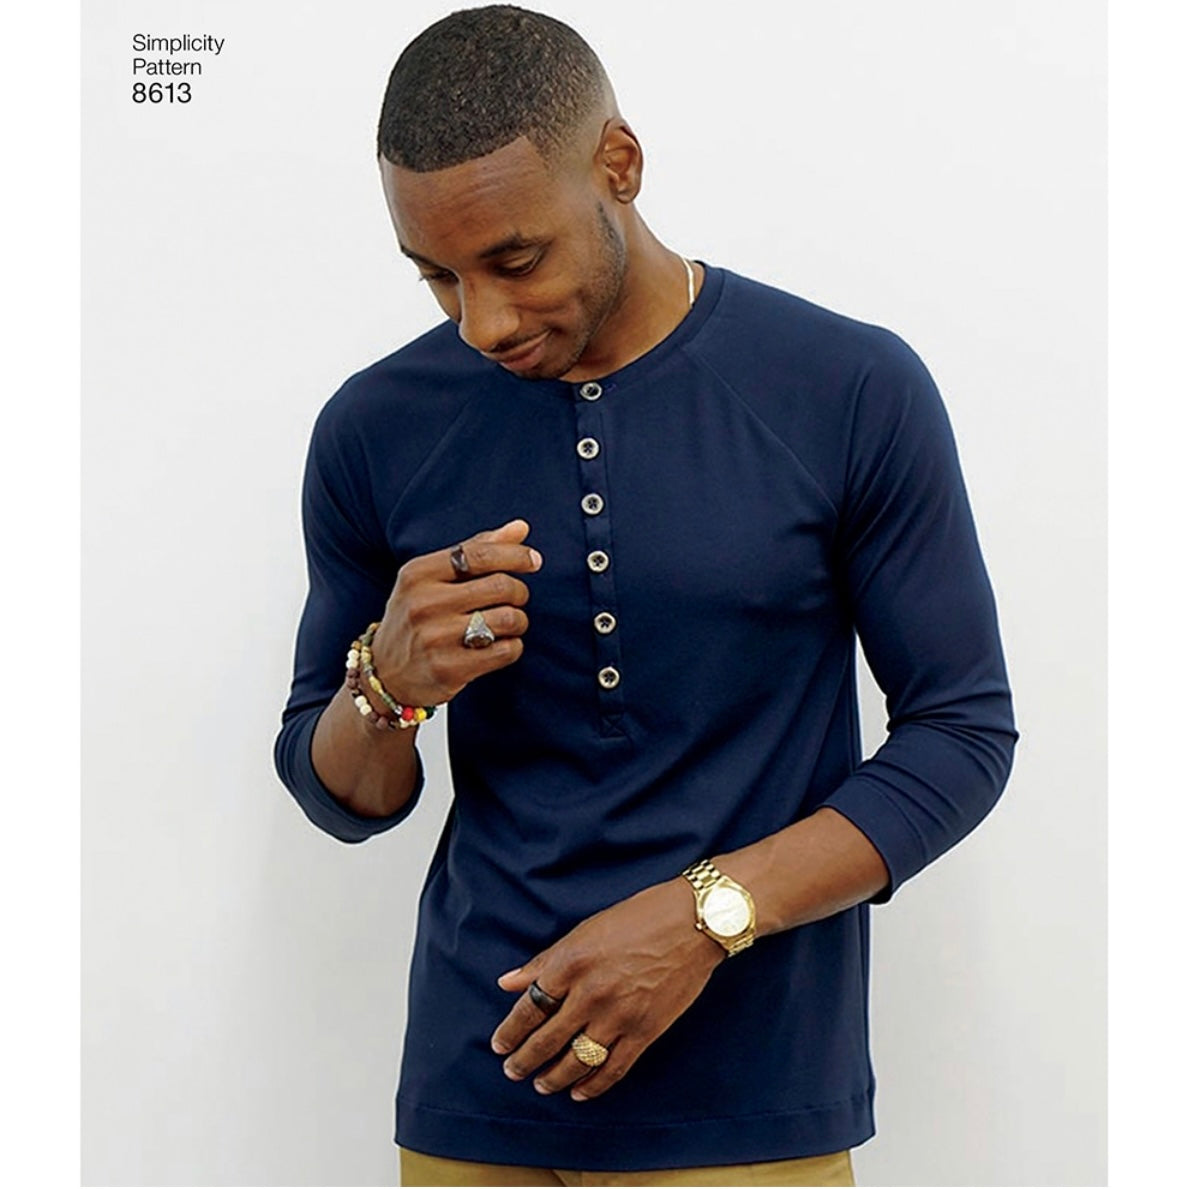 Simplicity S8613 - Mimi G Men’s Knit Top Sewing Pattern